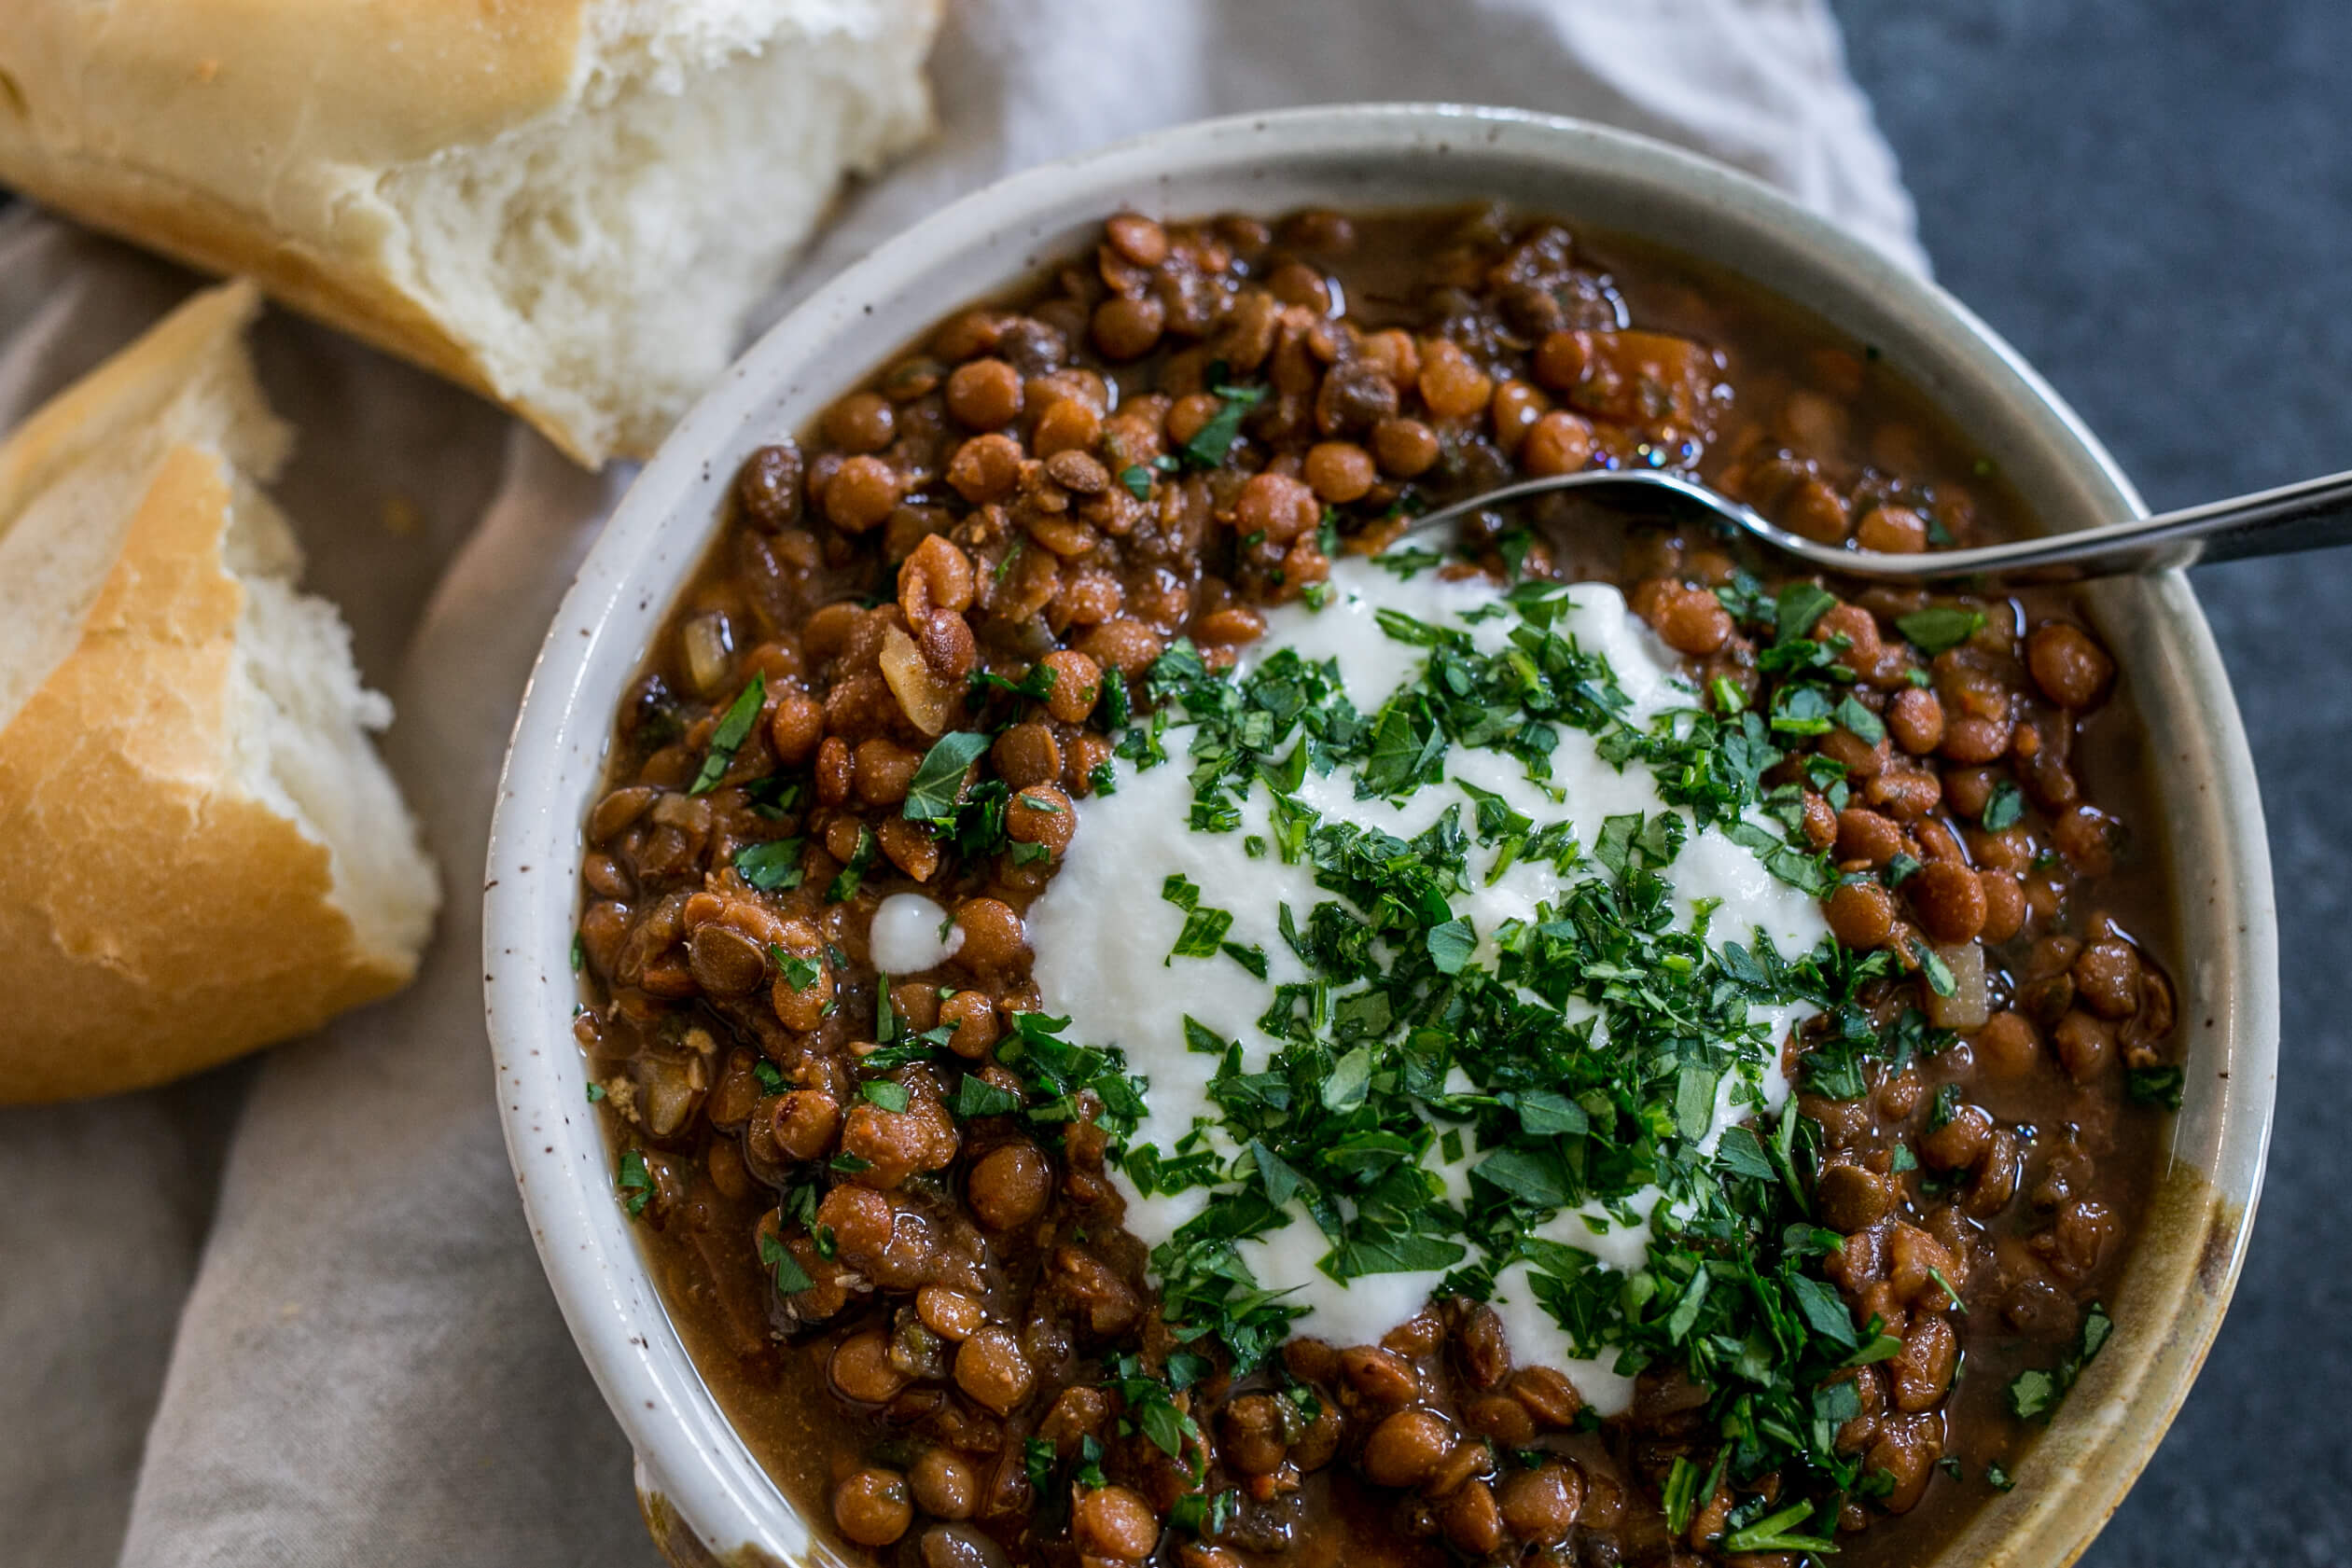 20 Healthy Meals to Help Your Clients Eat Healthy on a Tight Budget: Slow Cooker Morrocan Lentils